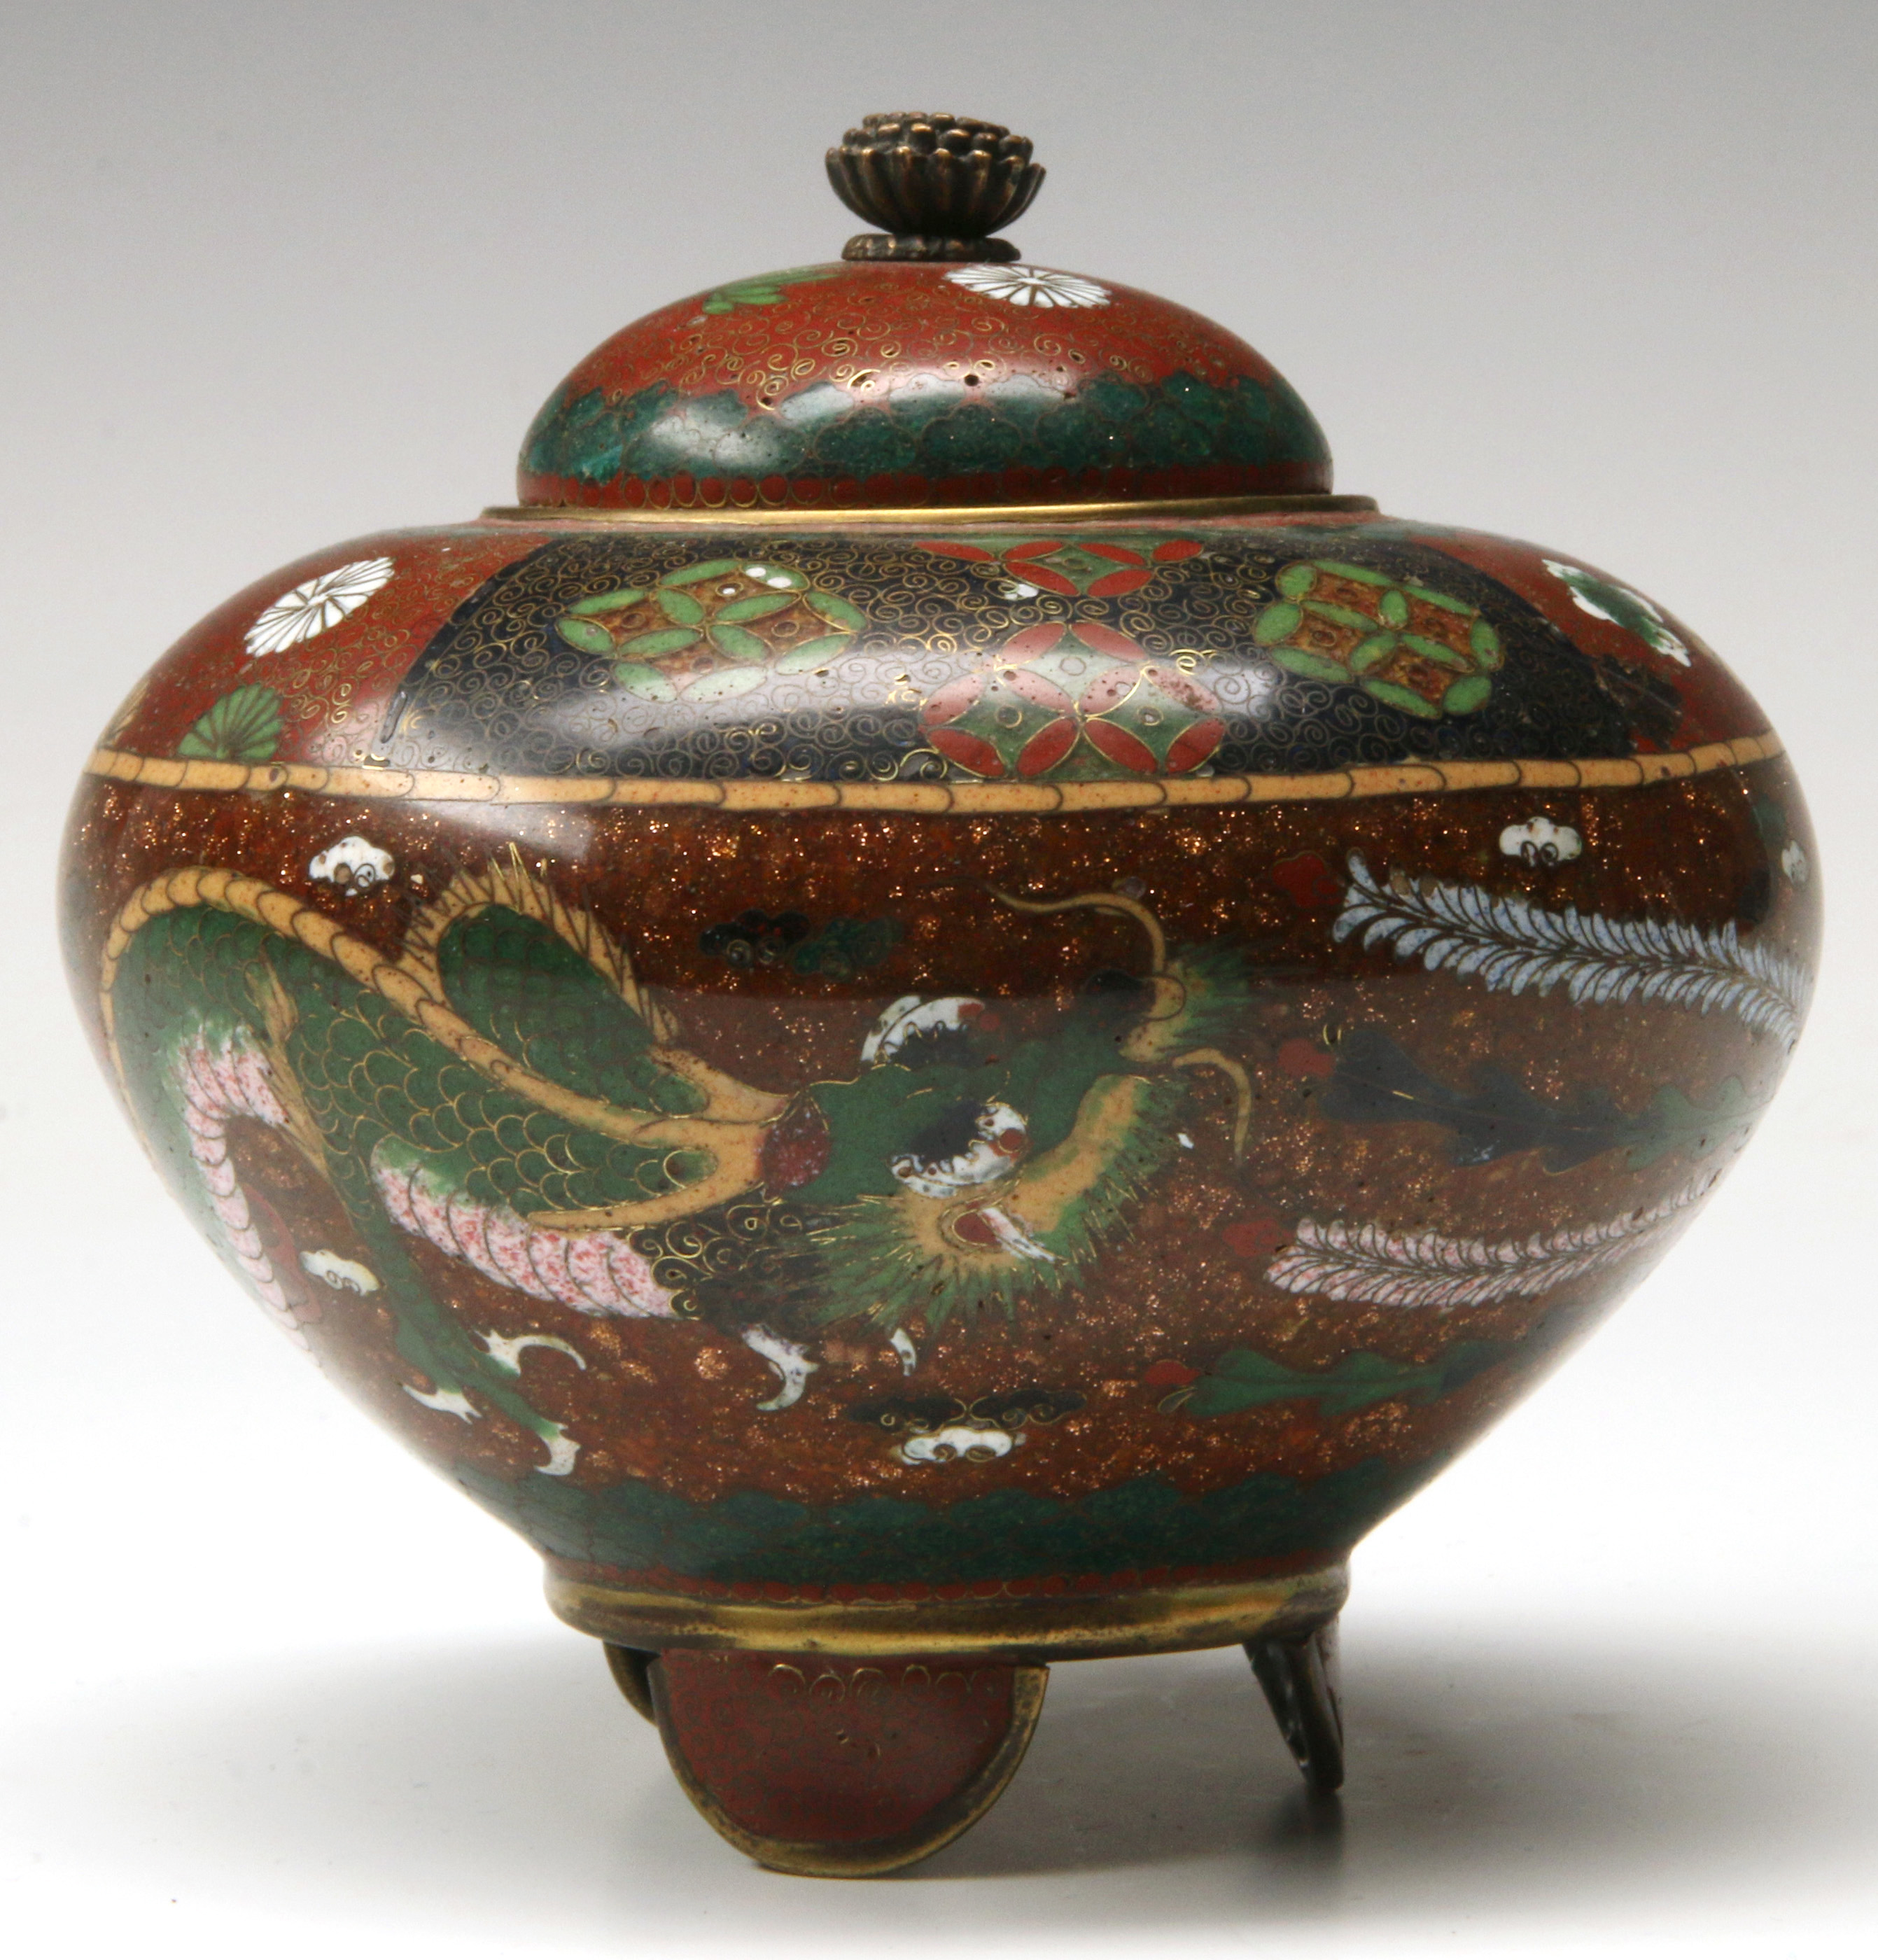 A FOOTED CLOISONNE COVERED JAR WITH IMPERIAL DRAGO